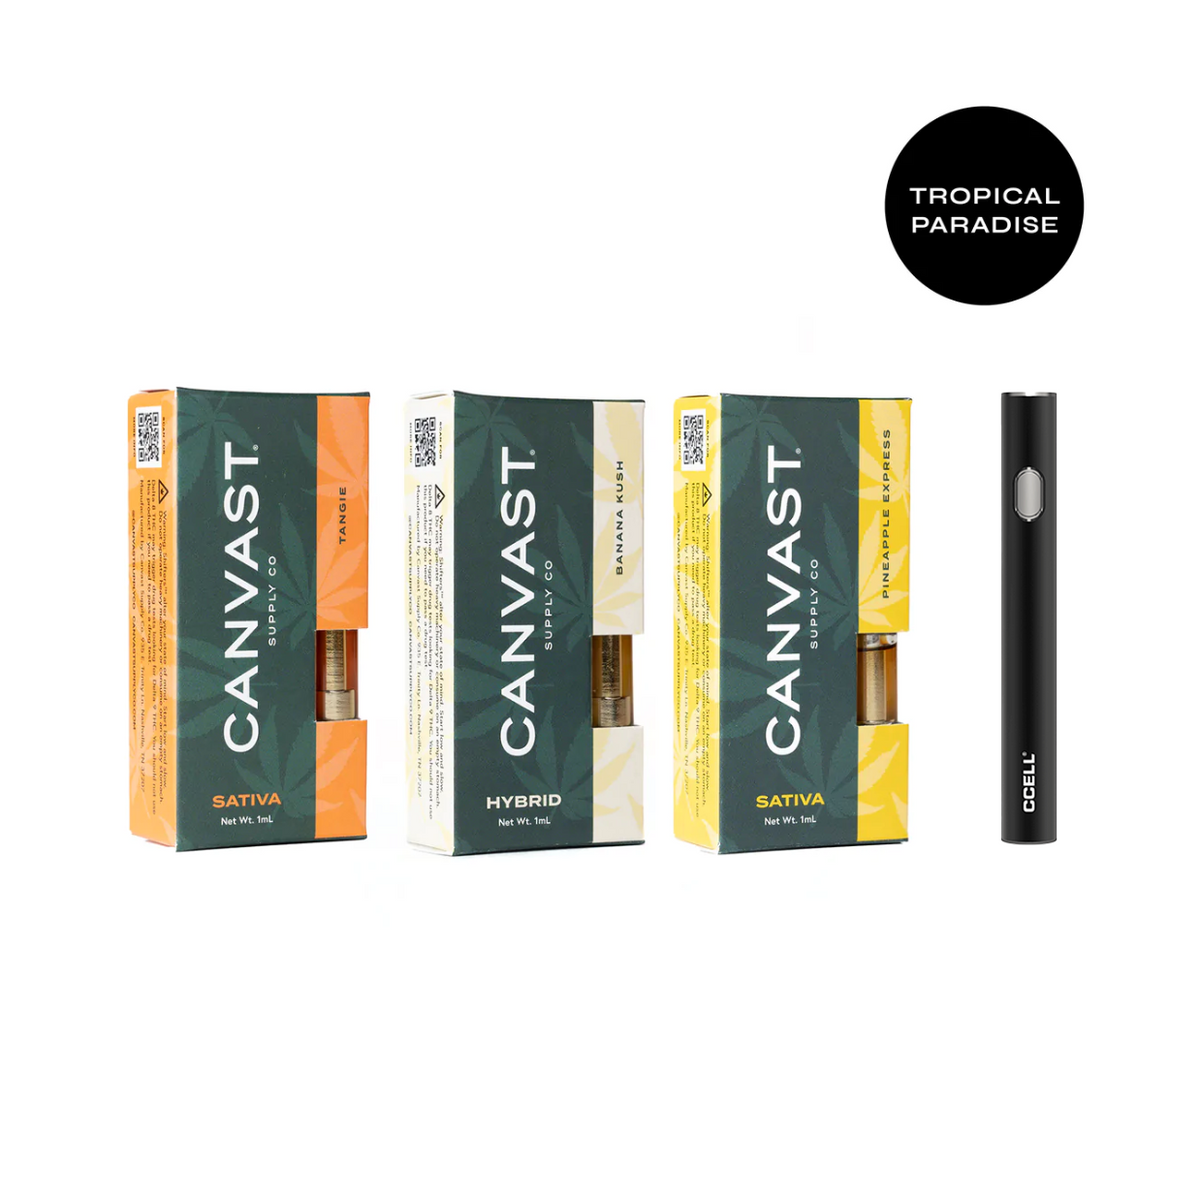 A line up of three vape cartridges and a c-cell 510 thread battery featuring Banana Kush terpenes, Tangie terpenes and Pineapple KushTerpenes in sativa and hybrid varieties.